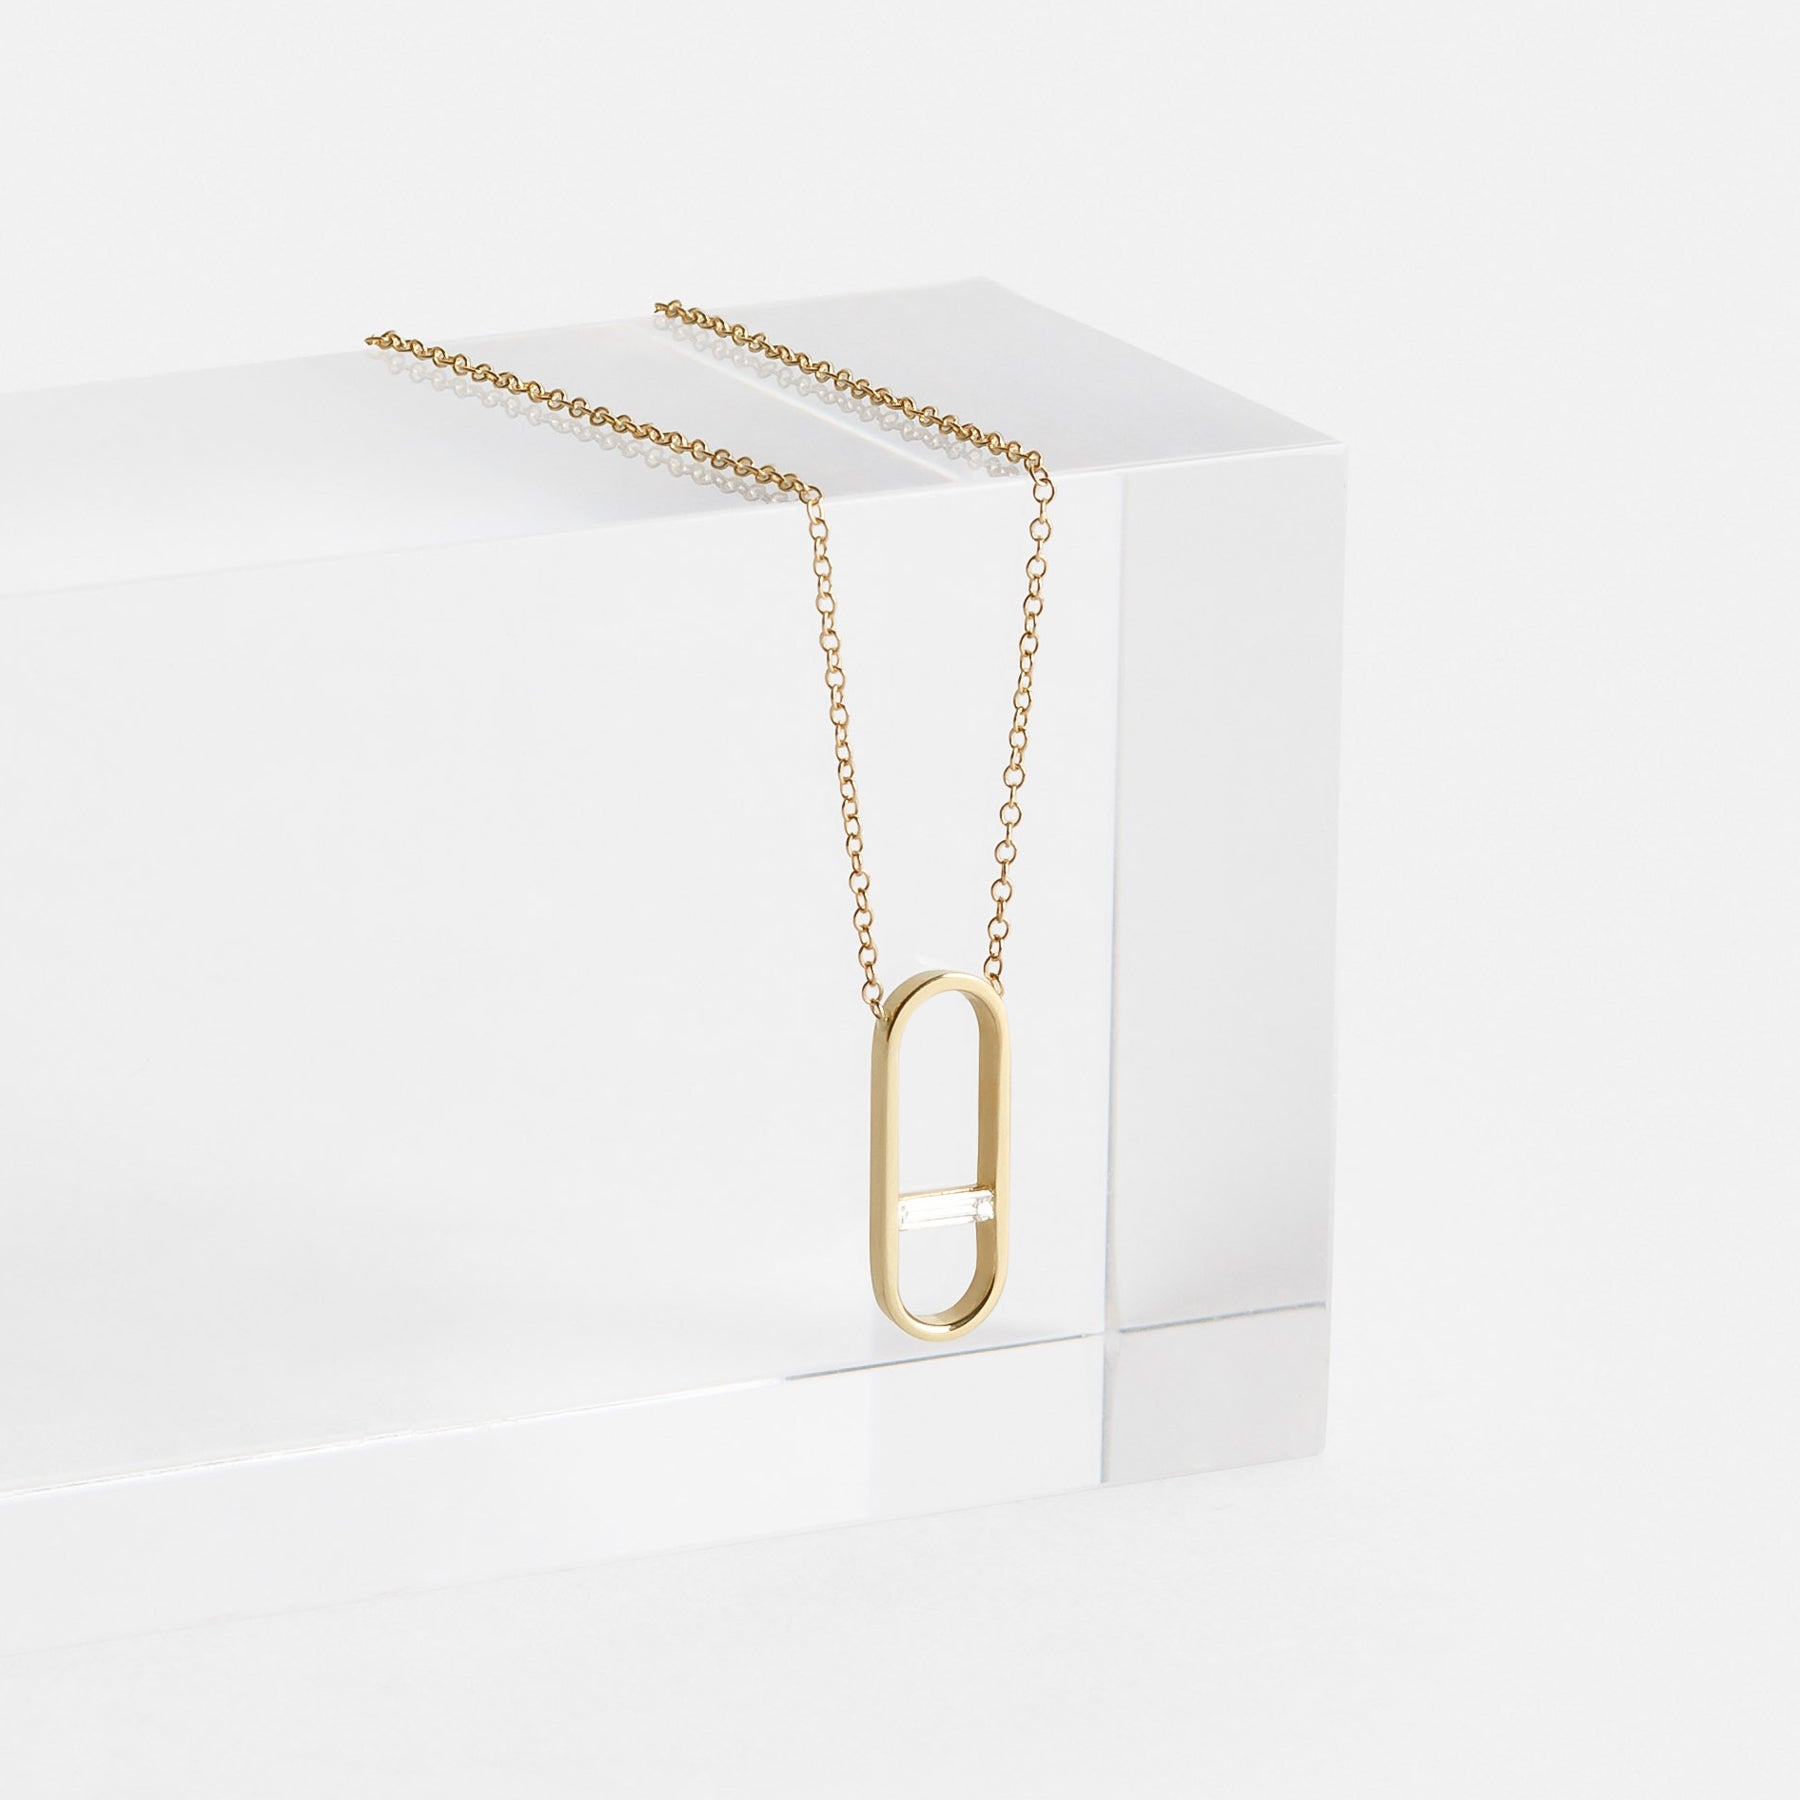 Ranga Non-Traditional Necklace in 14k Gold set with White Baguette Diamond By SHW Fine Jewelry NYC